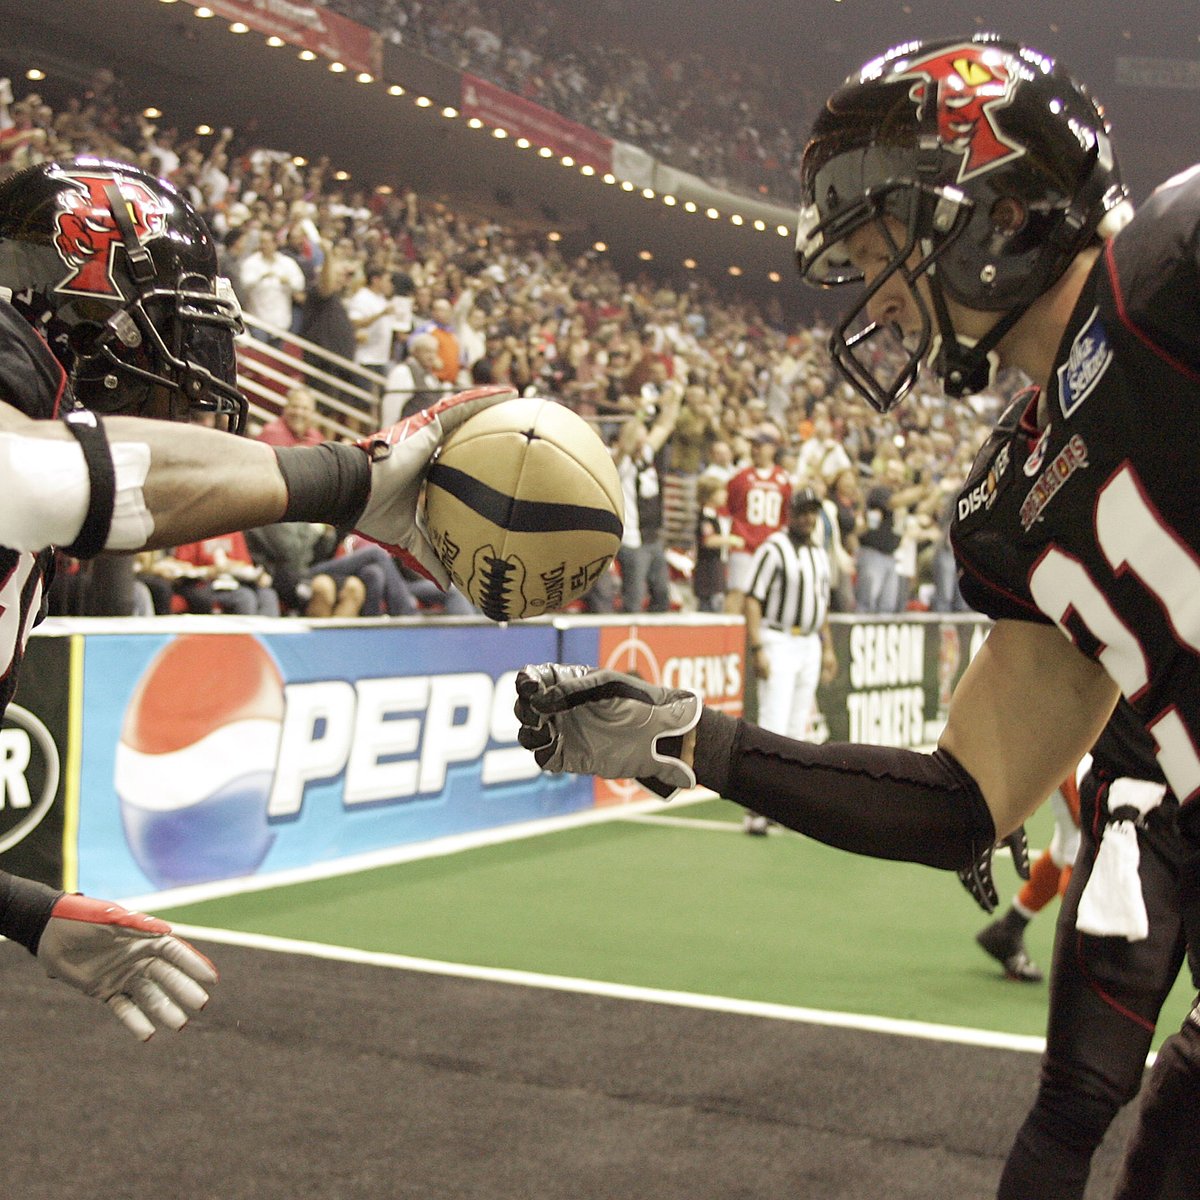 Salem Oregon will get Arena Football League franchise in 2024